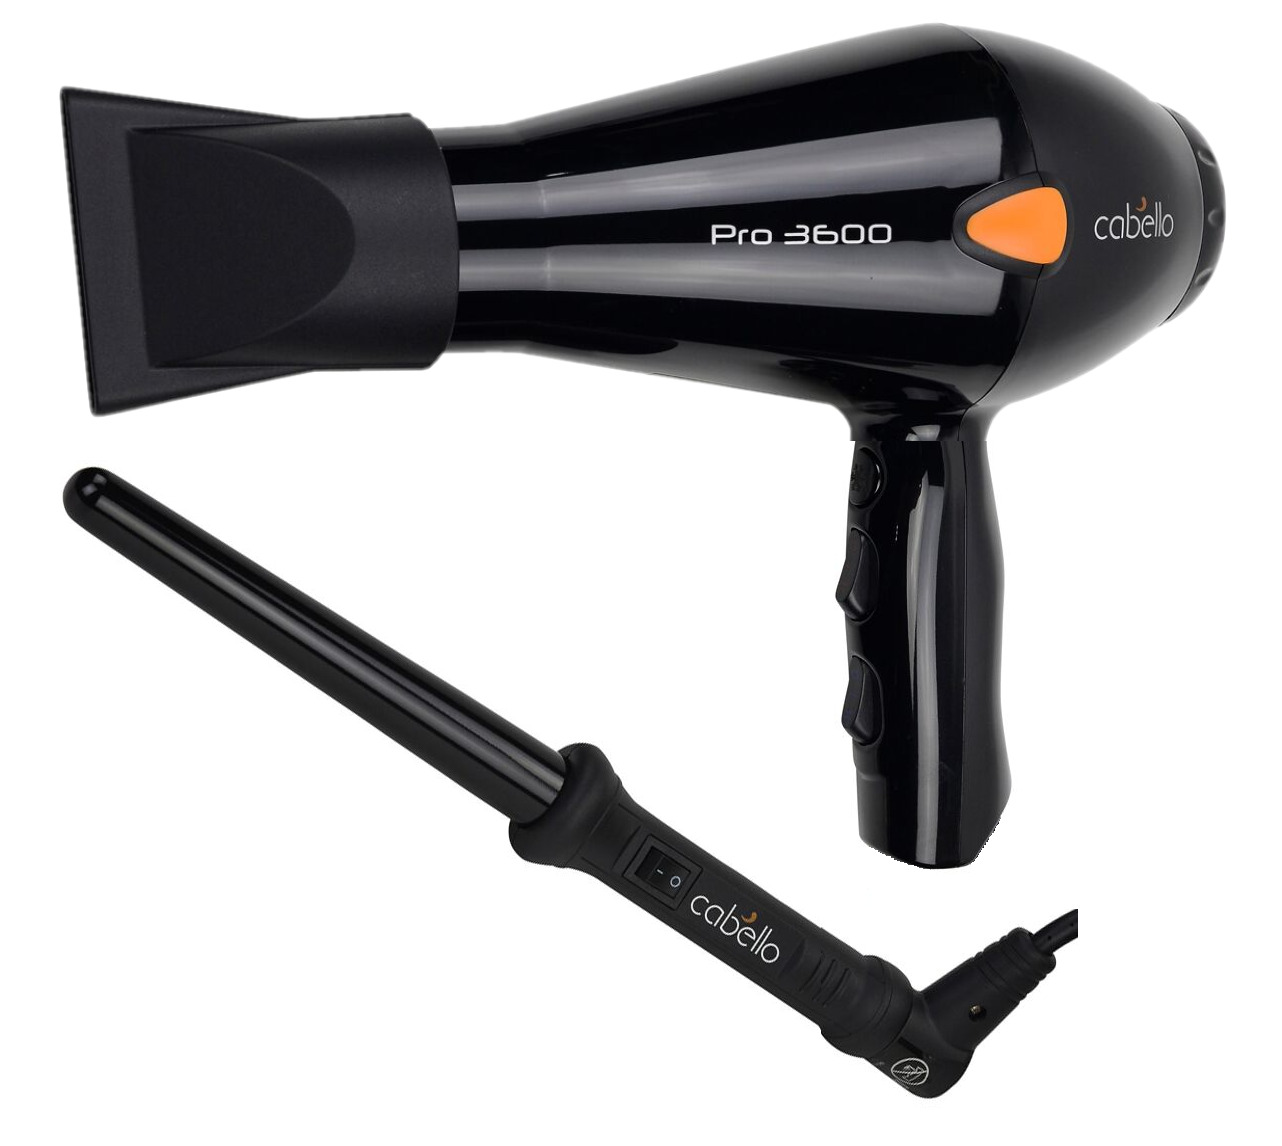 Cabello Hair Dryer PRO 3600 (Black)+Tapered Curling Iron-Value Hair Tools 2 Pack